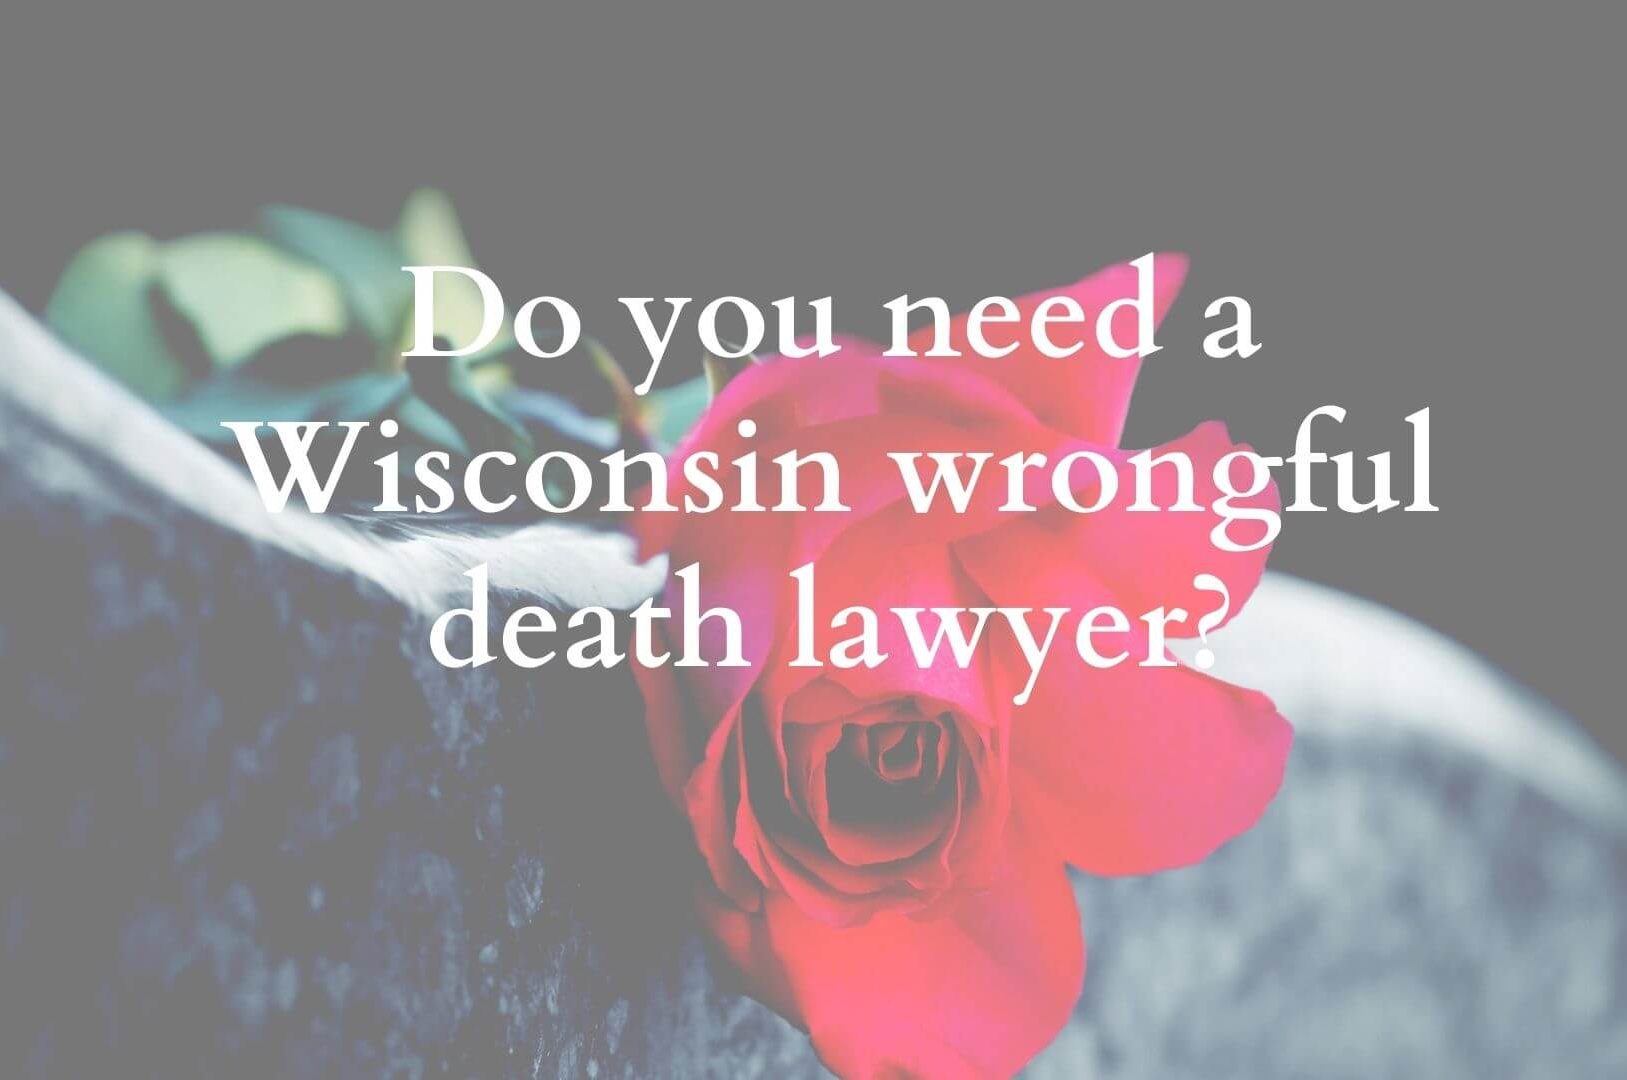 Do you need a Wisconsin wrongful death lawyer